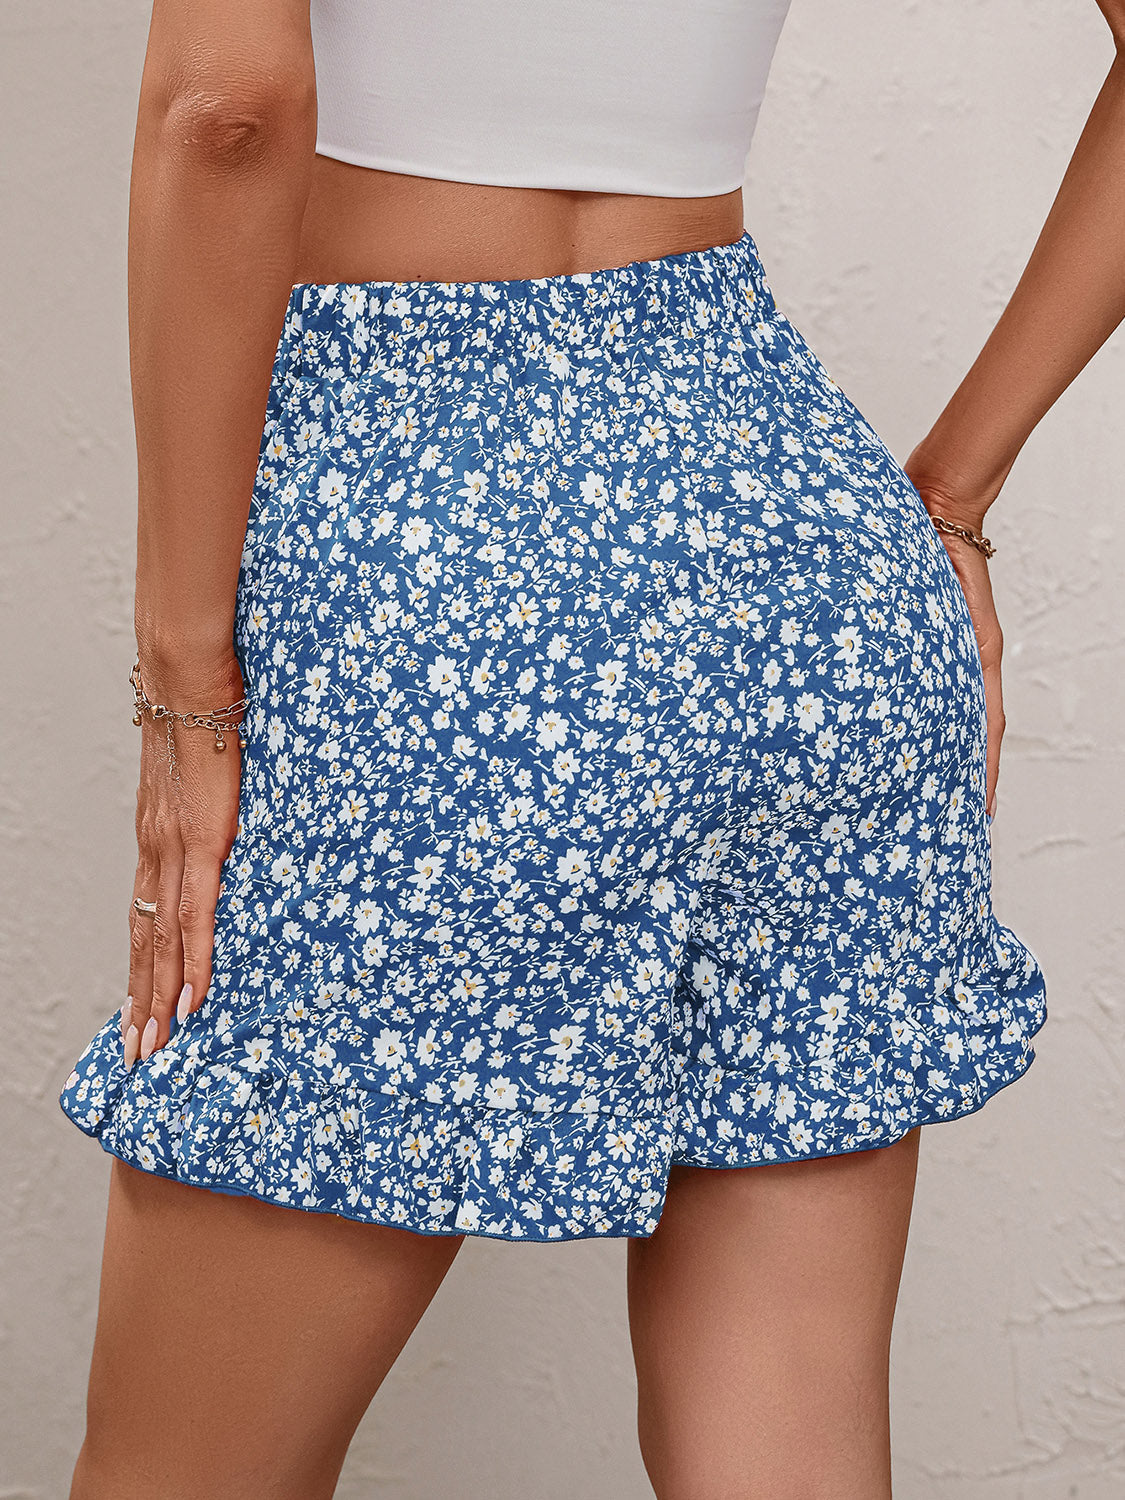 Printed Tie Waist Shorts - Women’s Clothing & Accessories - Shorts - 8 - 2024